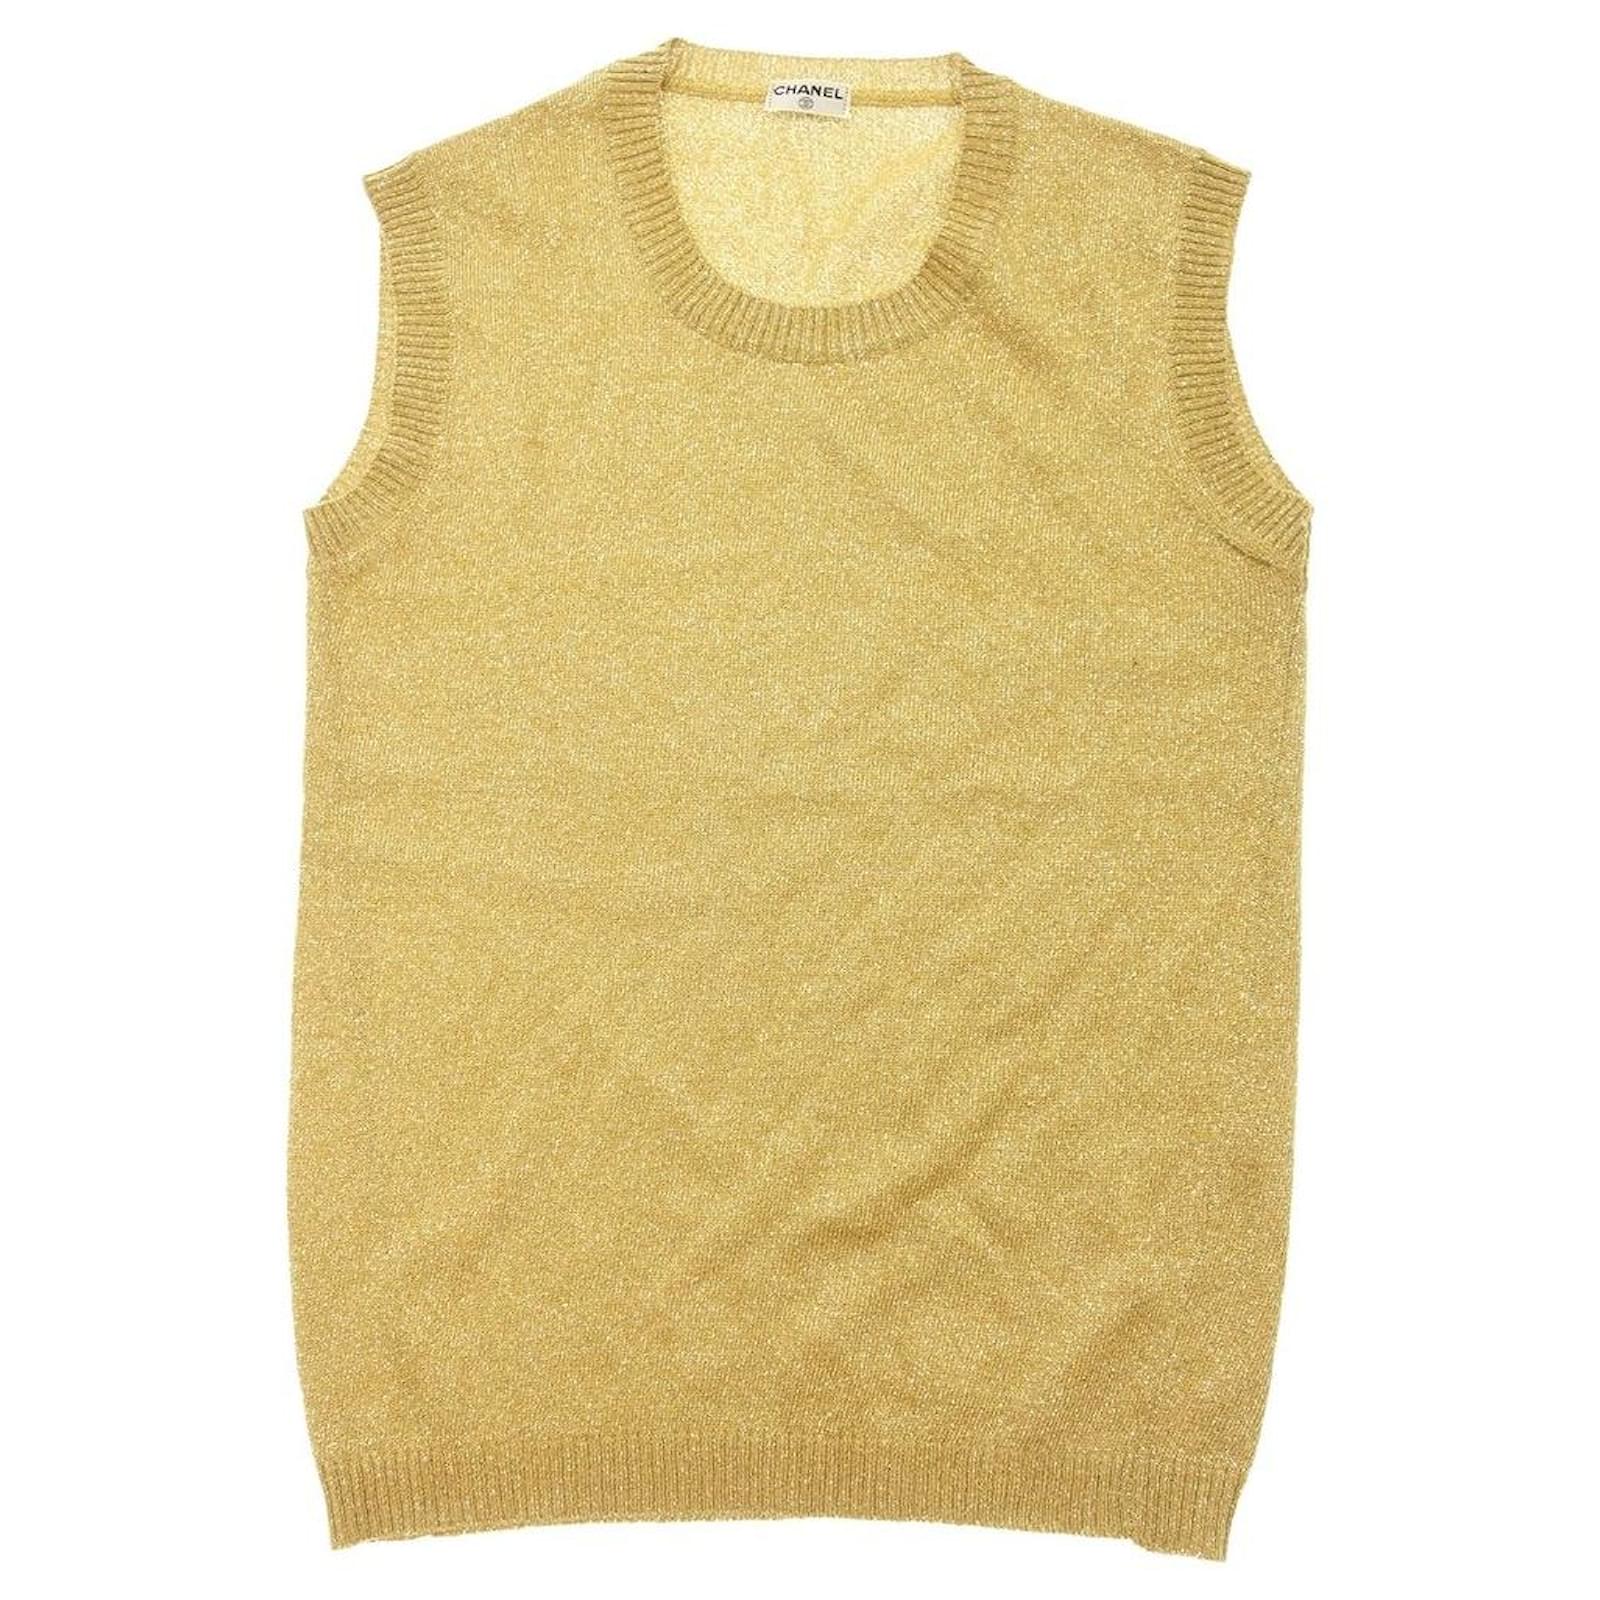 Used] CHANEL Lame Sleeveless Knit Sweater Tops Gold Ladies Golden